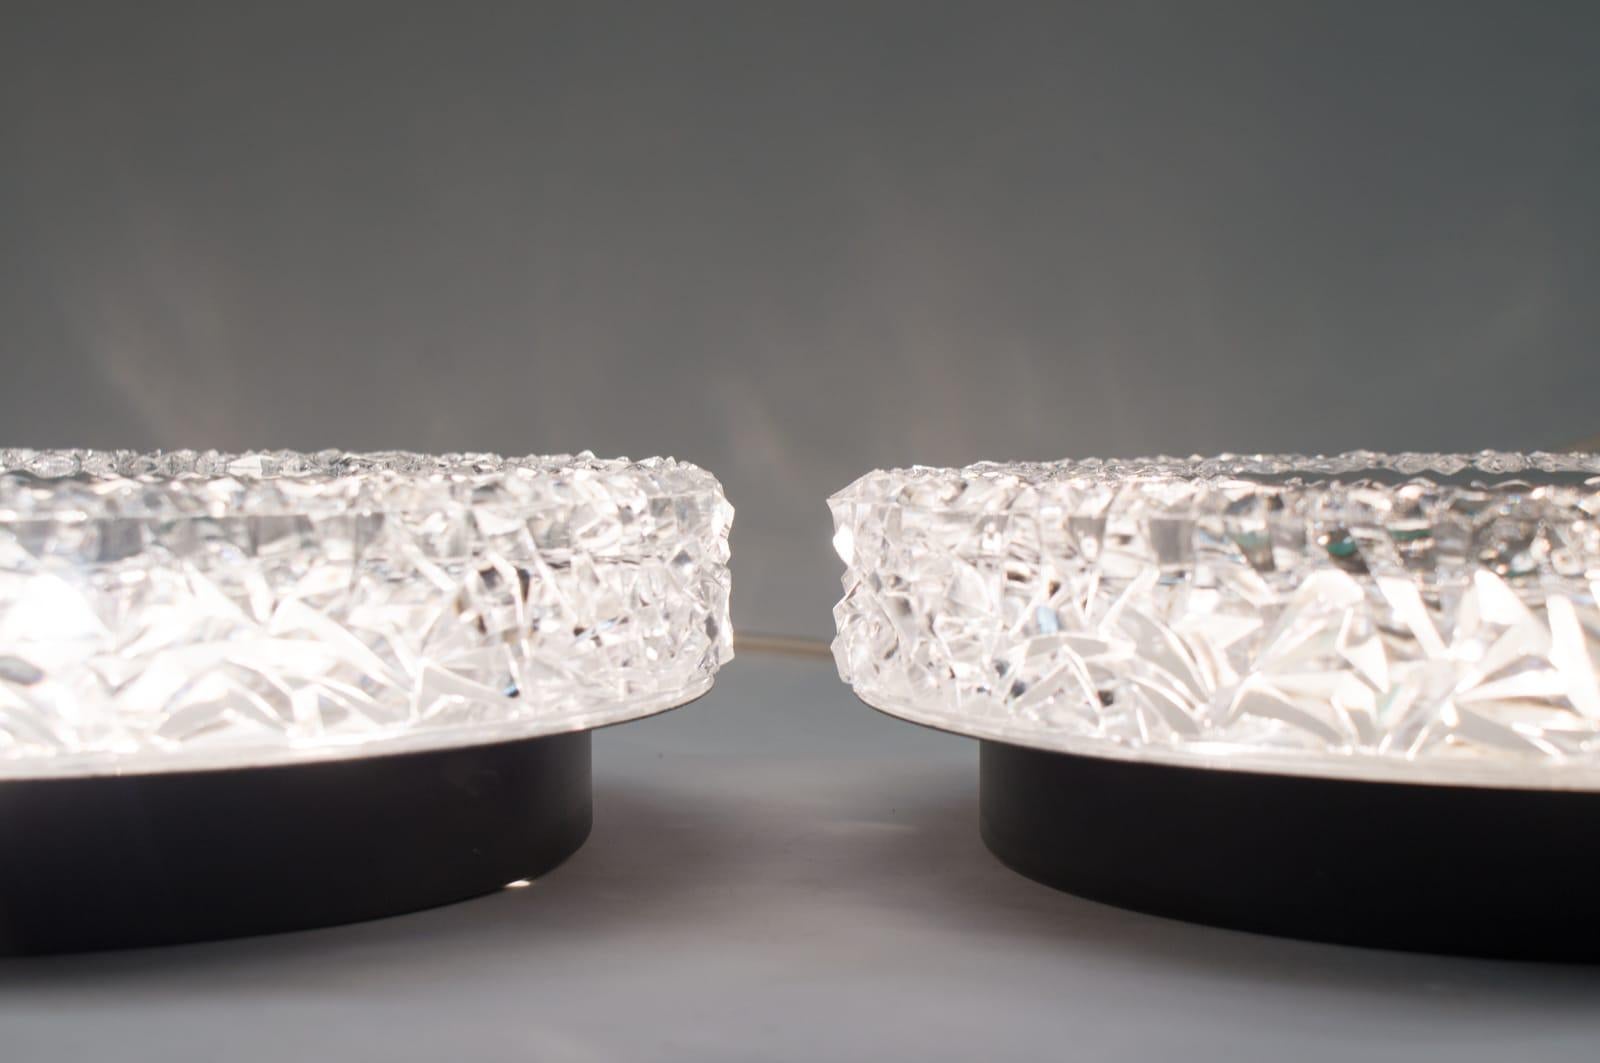 Set of 2 Textured Glass and Mirror Ceiling Wall Flushmounts, Hillebrand, 1960s For Sale 2